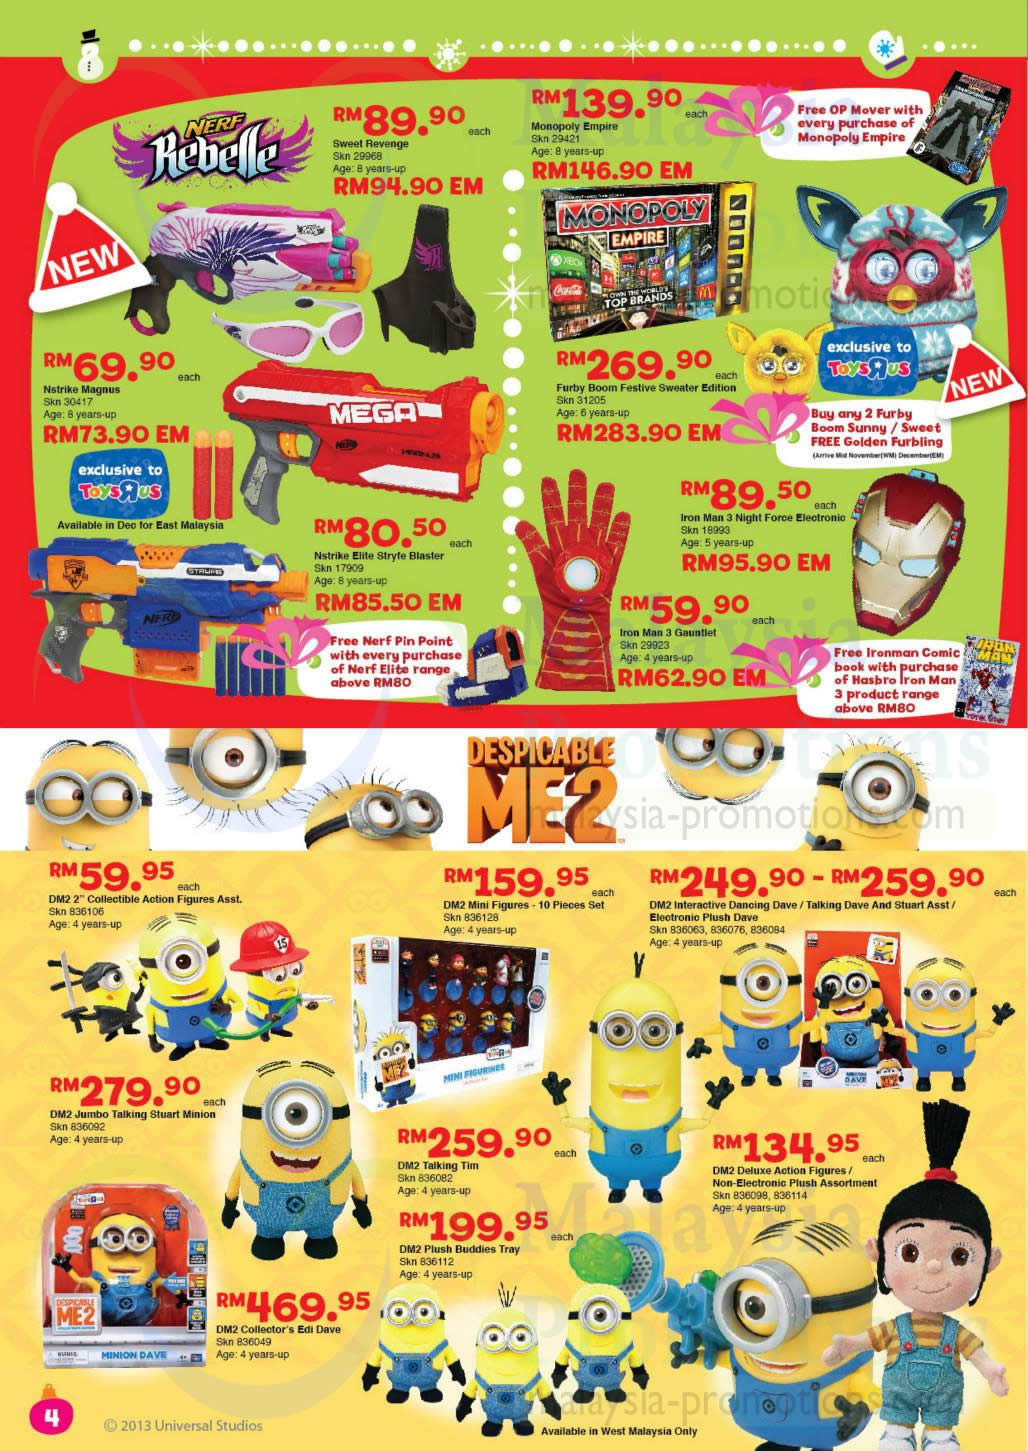 Babies R Us Nerf Rebelle Despicable Me 2 Toys The Big Toys R Us Book Offers 5 Nov 2013 2 Jan 2014 Msiapromos Com